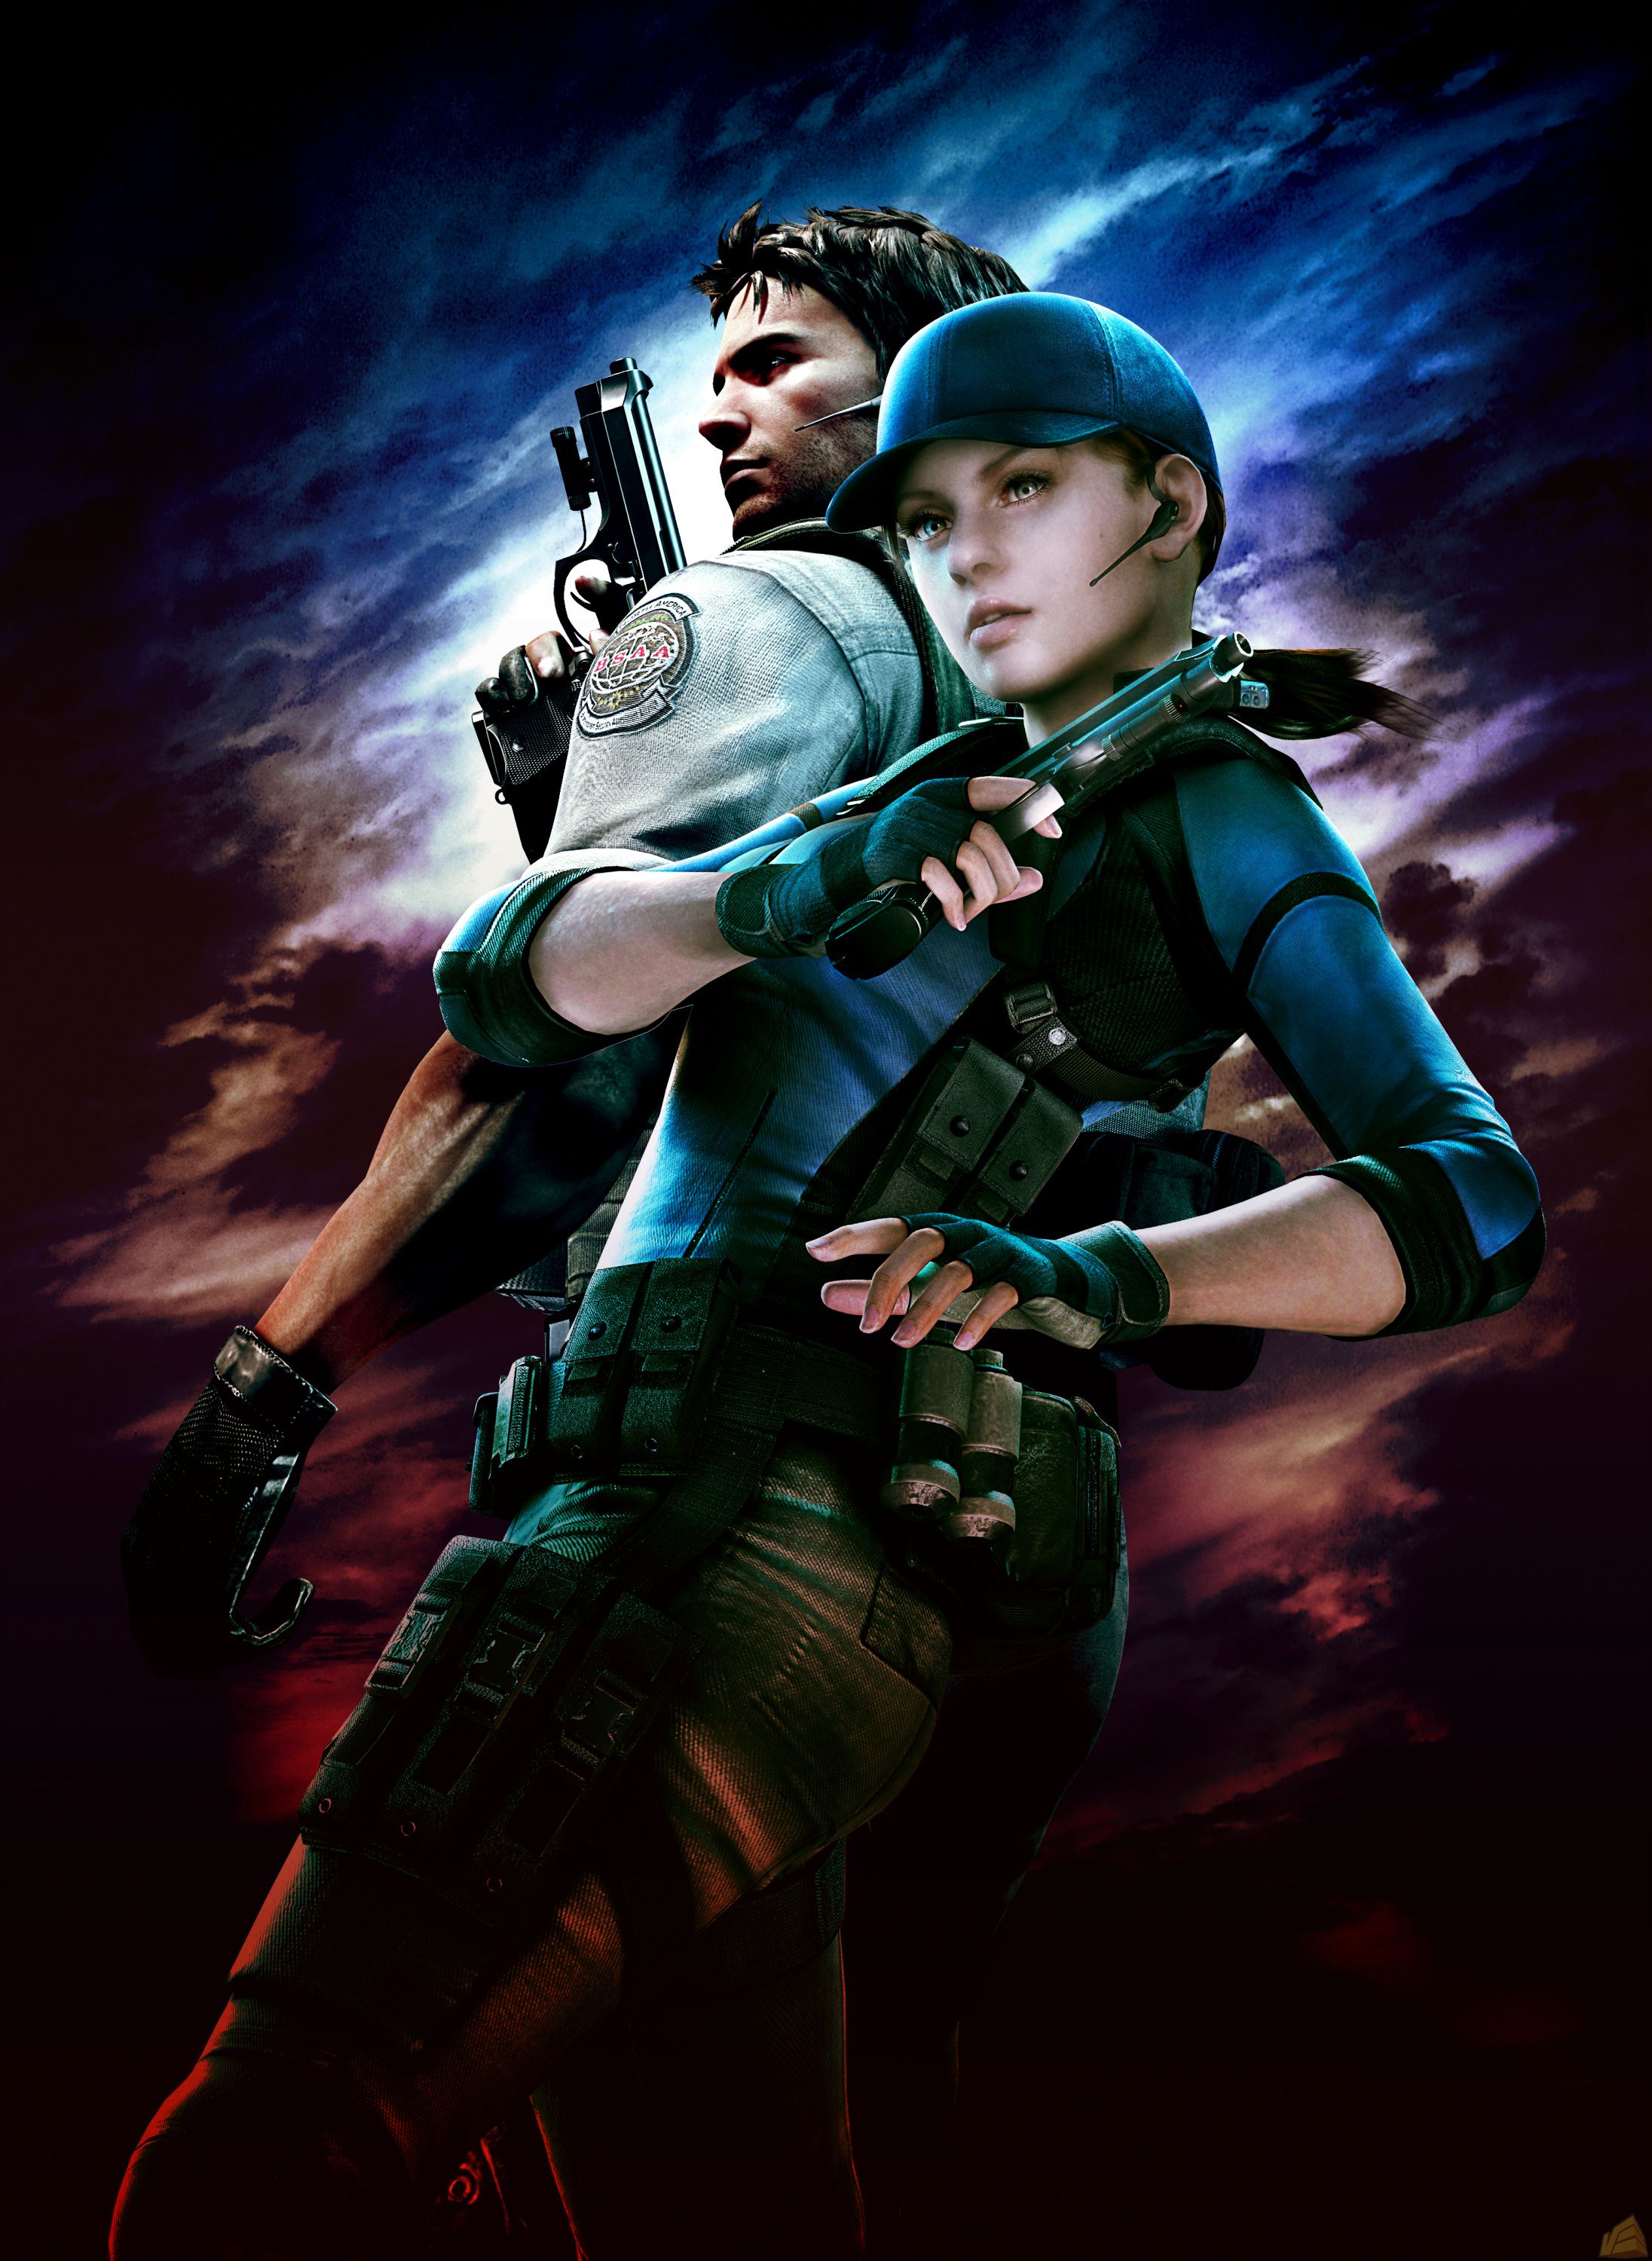 resident evil 5 gold edition save file